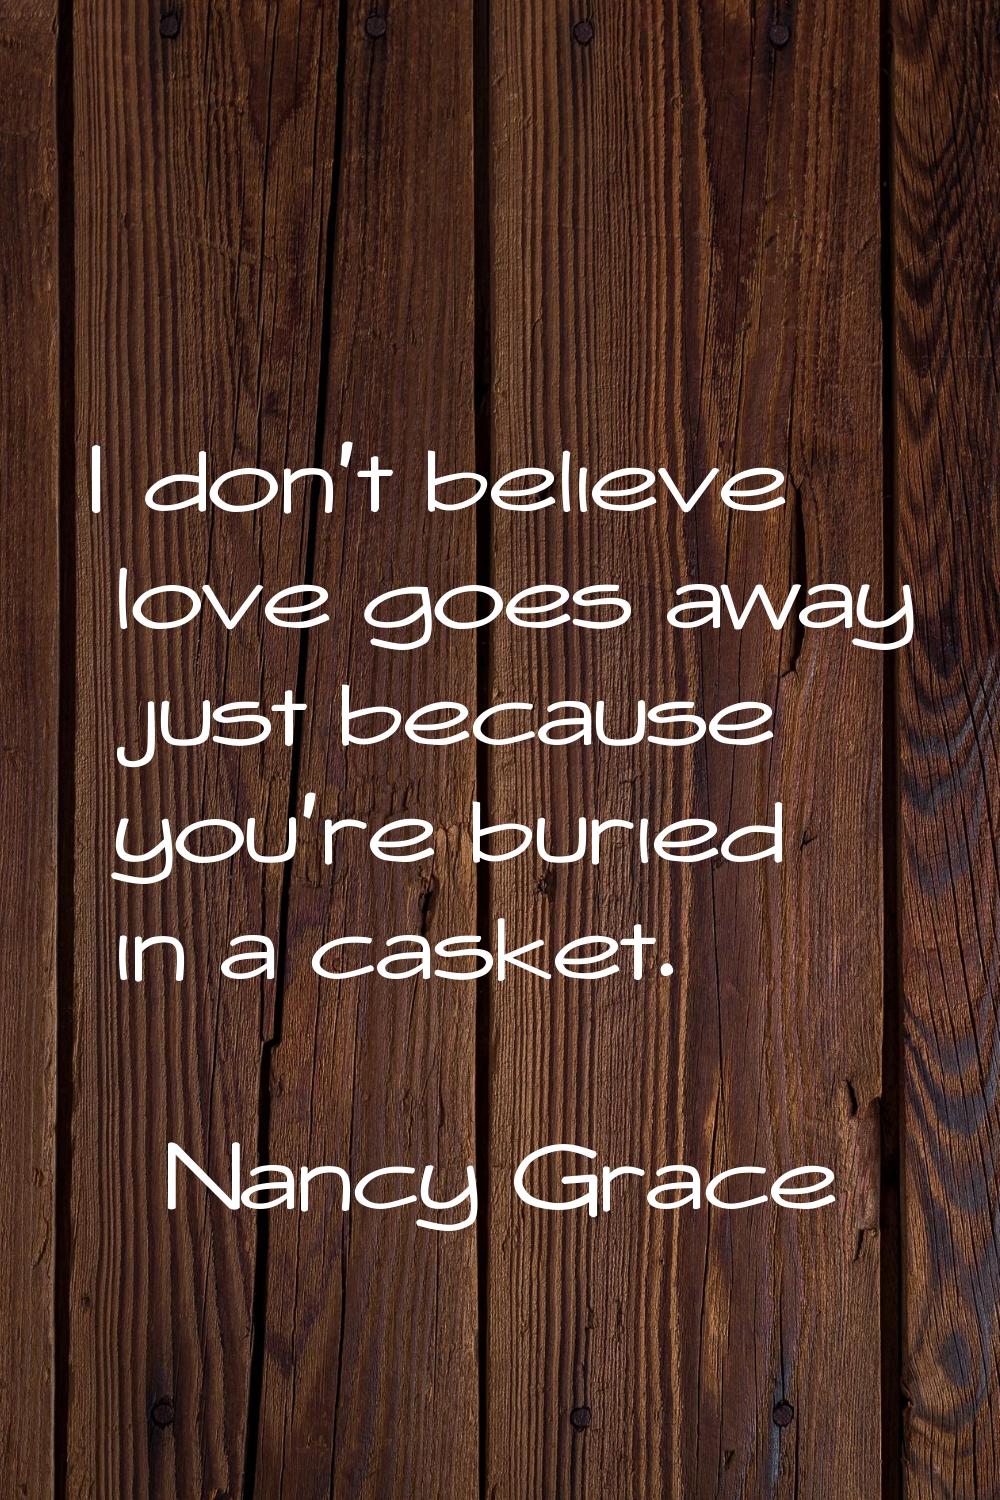 I don't believe love goes away just because you're buried in a casket.